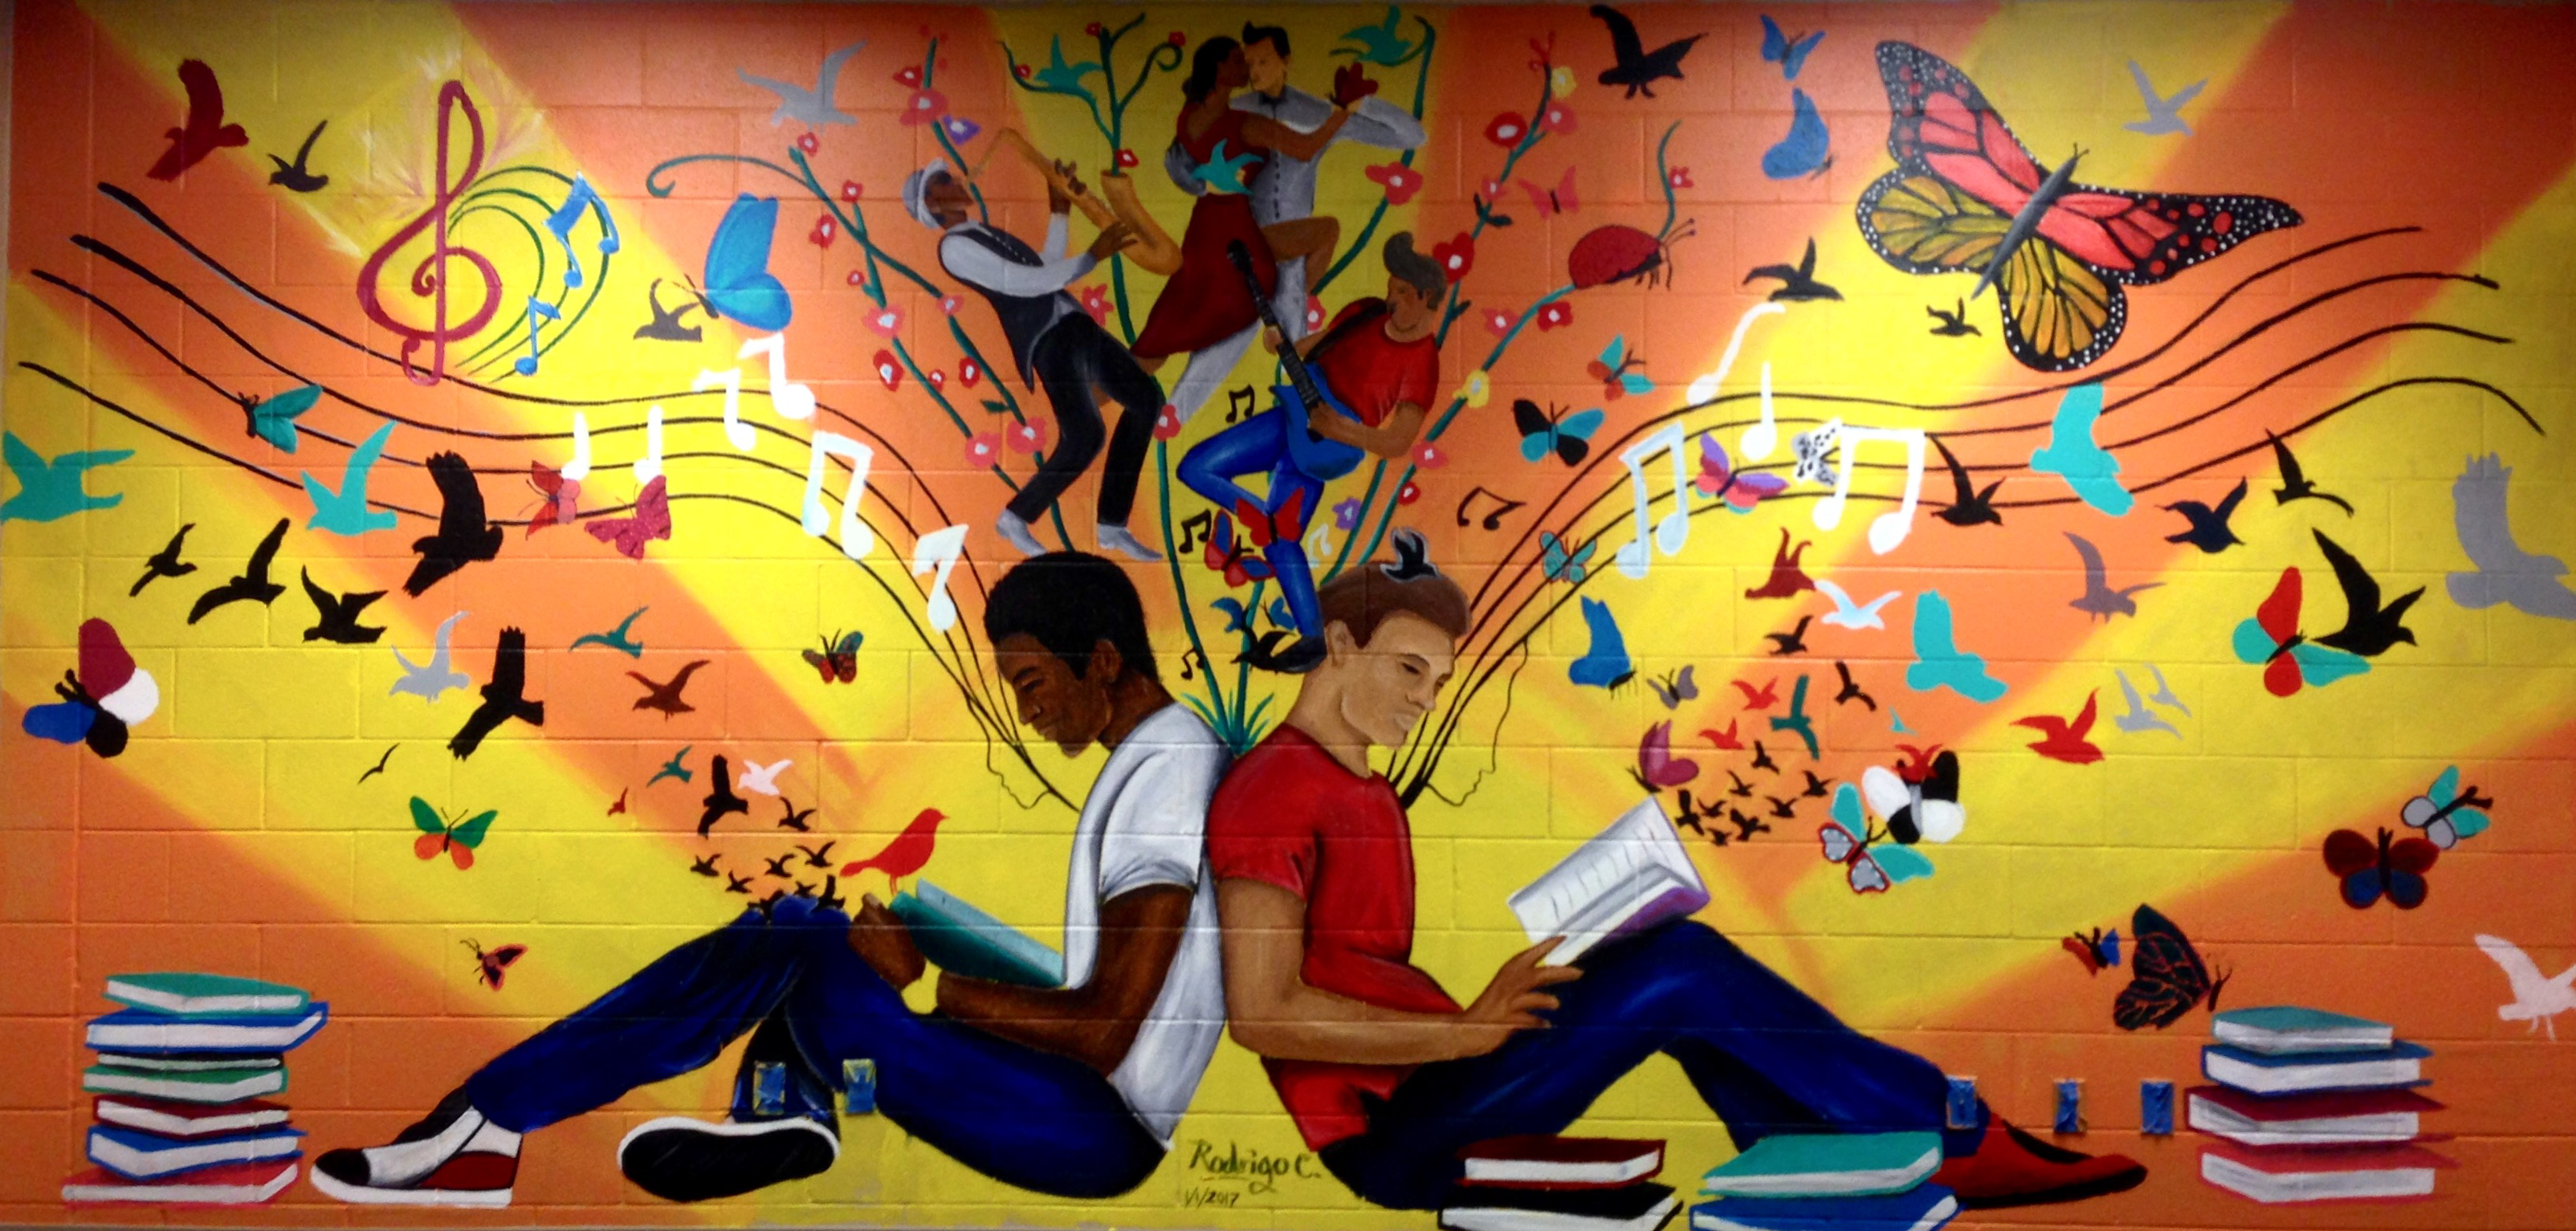 Madison Public Library's Bubbler Making Justice "Sunny Horizons" mural residency with Rodrigo Carapia